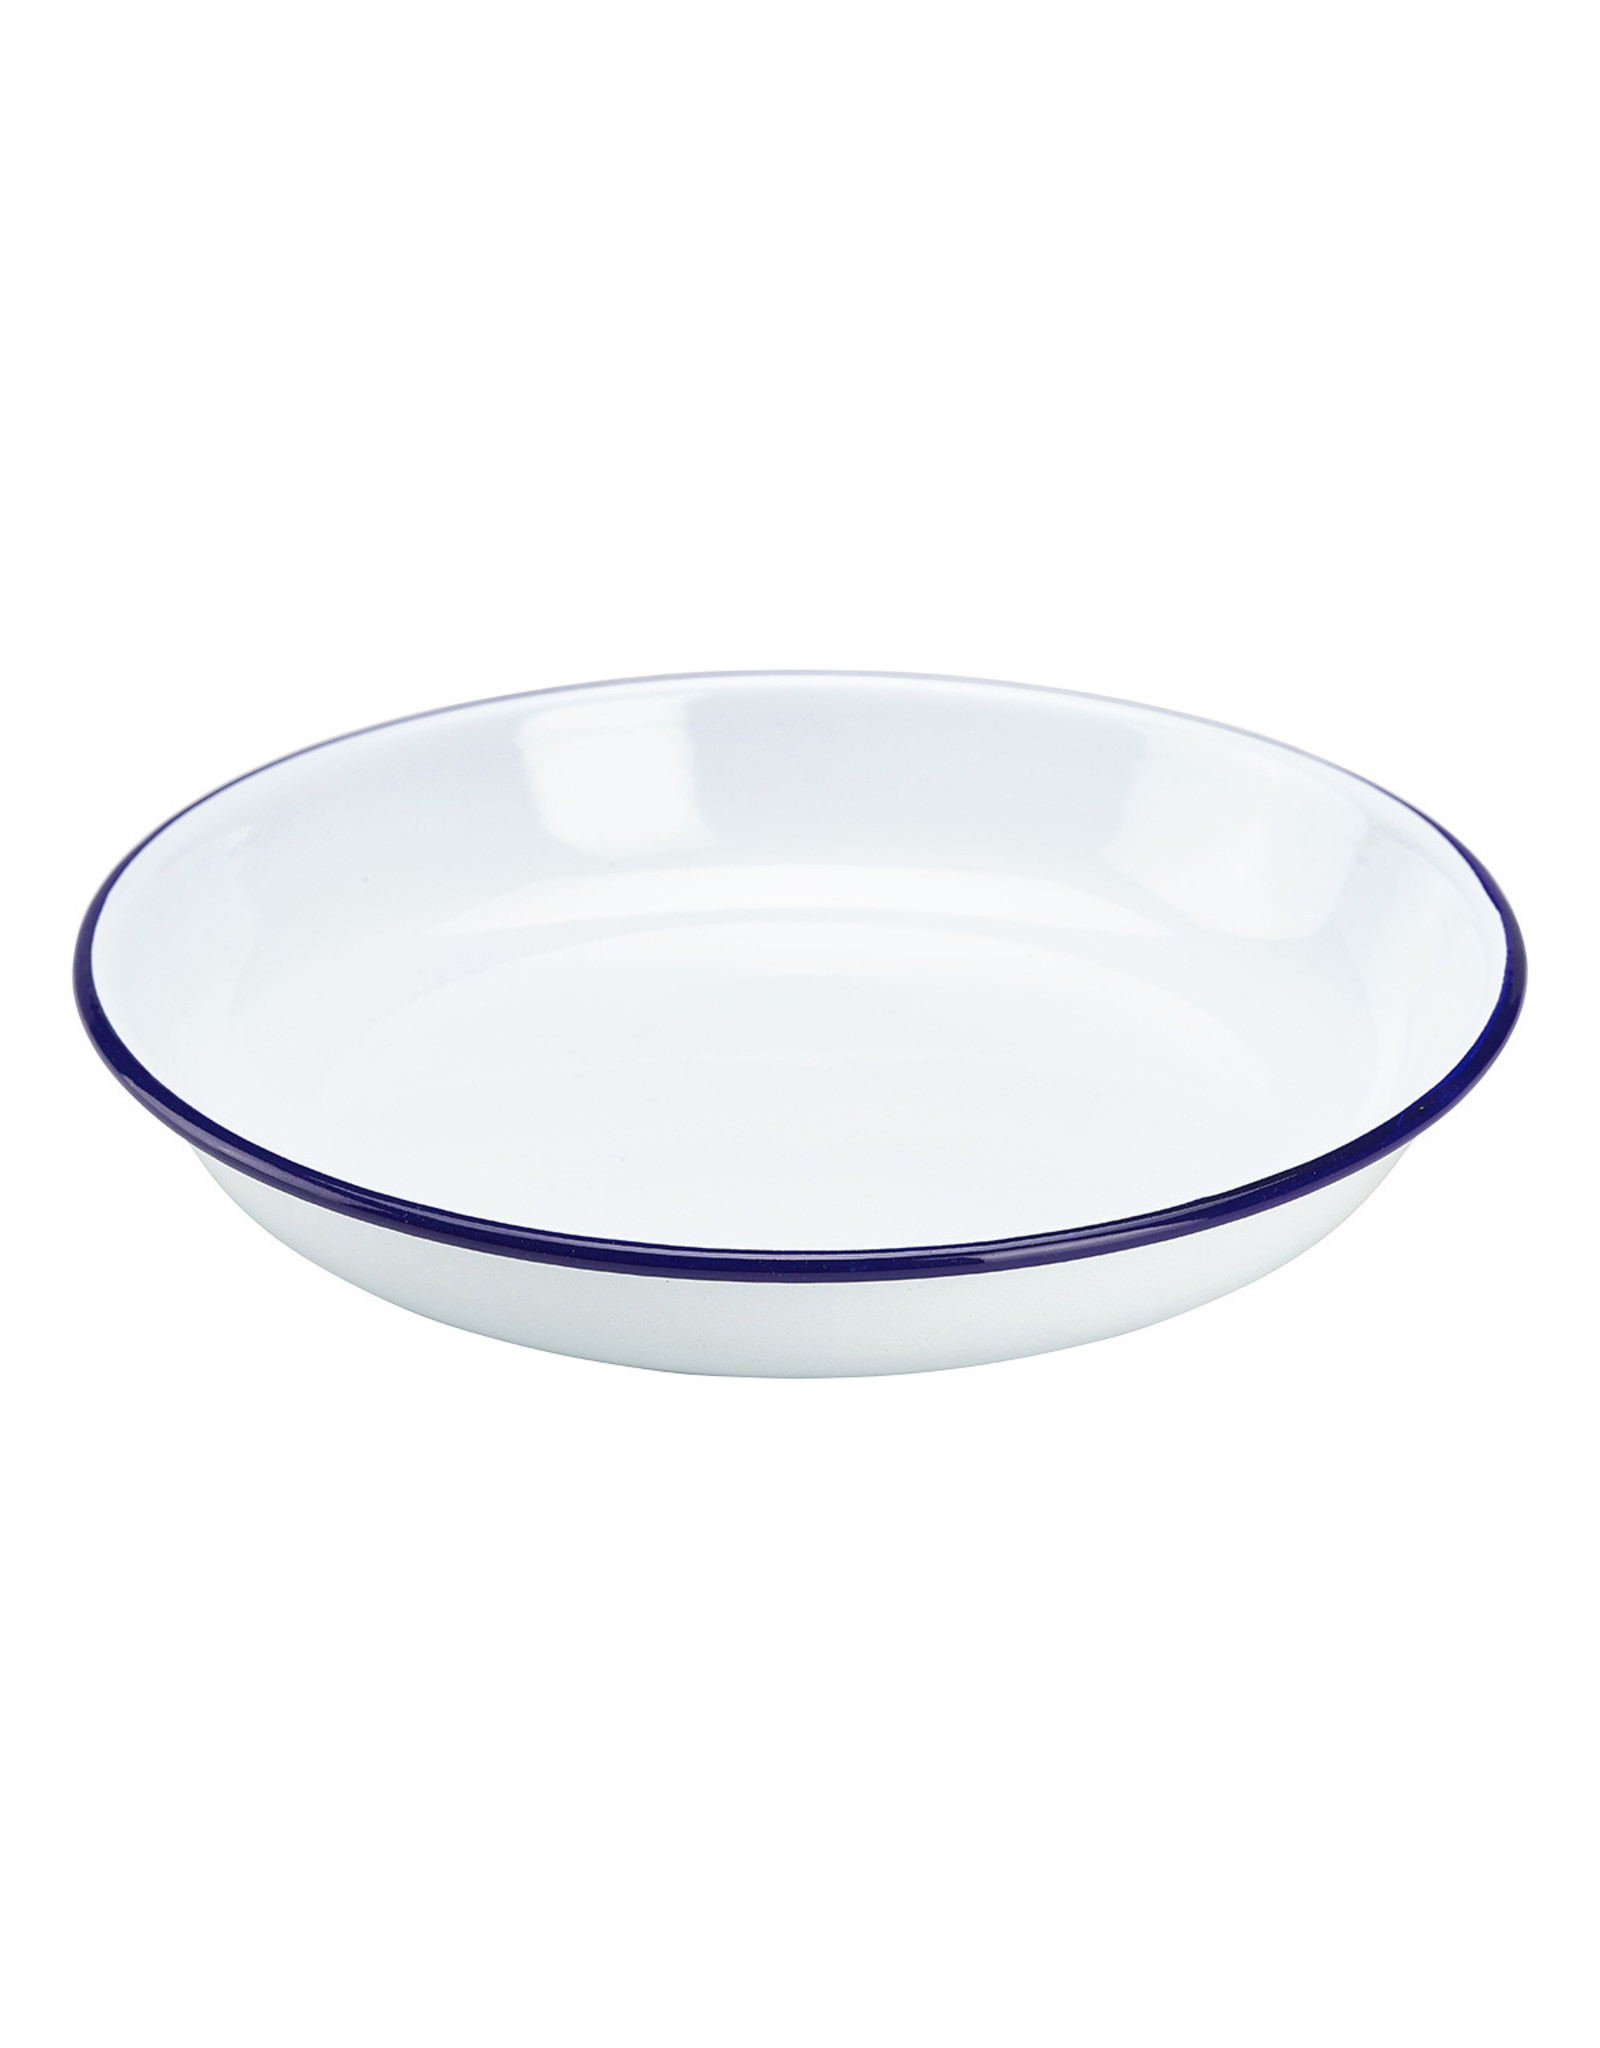 Stylepoint Enamel pasta plate with blue rim 22 cm